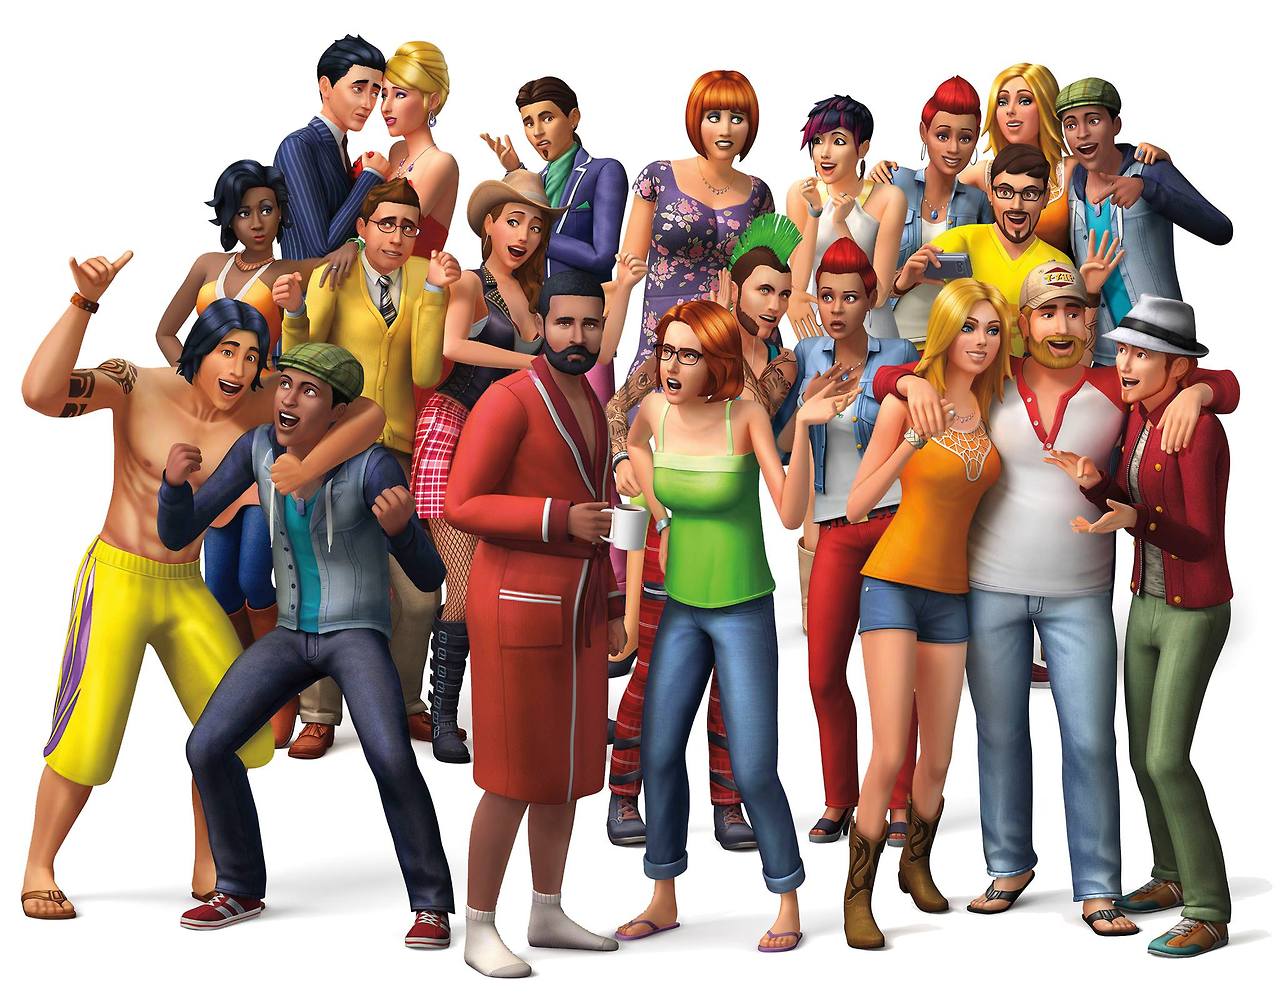 My love-hate relationship with ‘the sims 4’